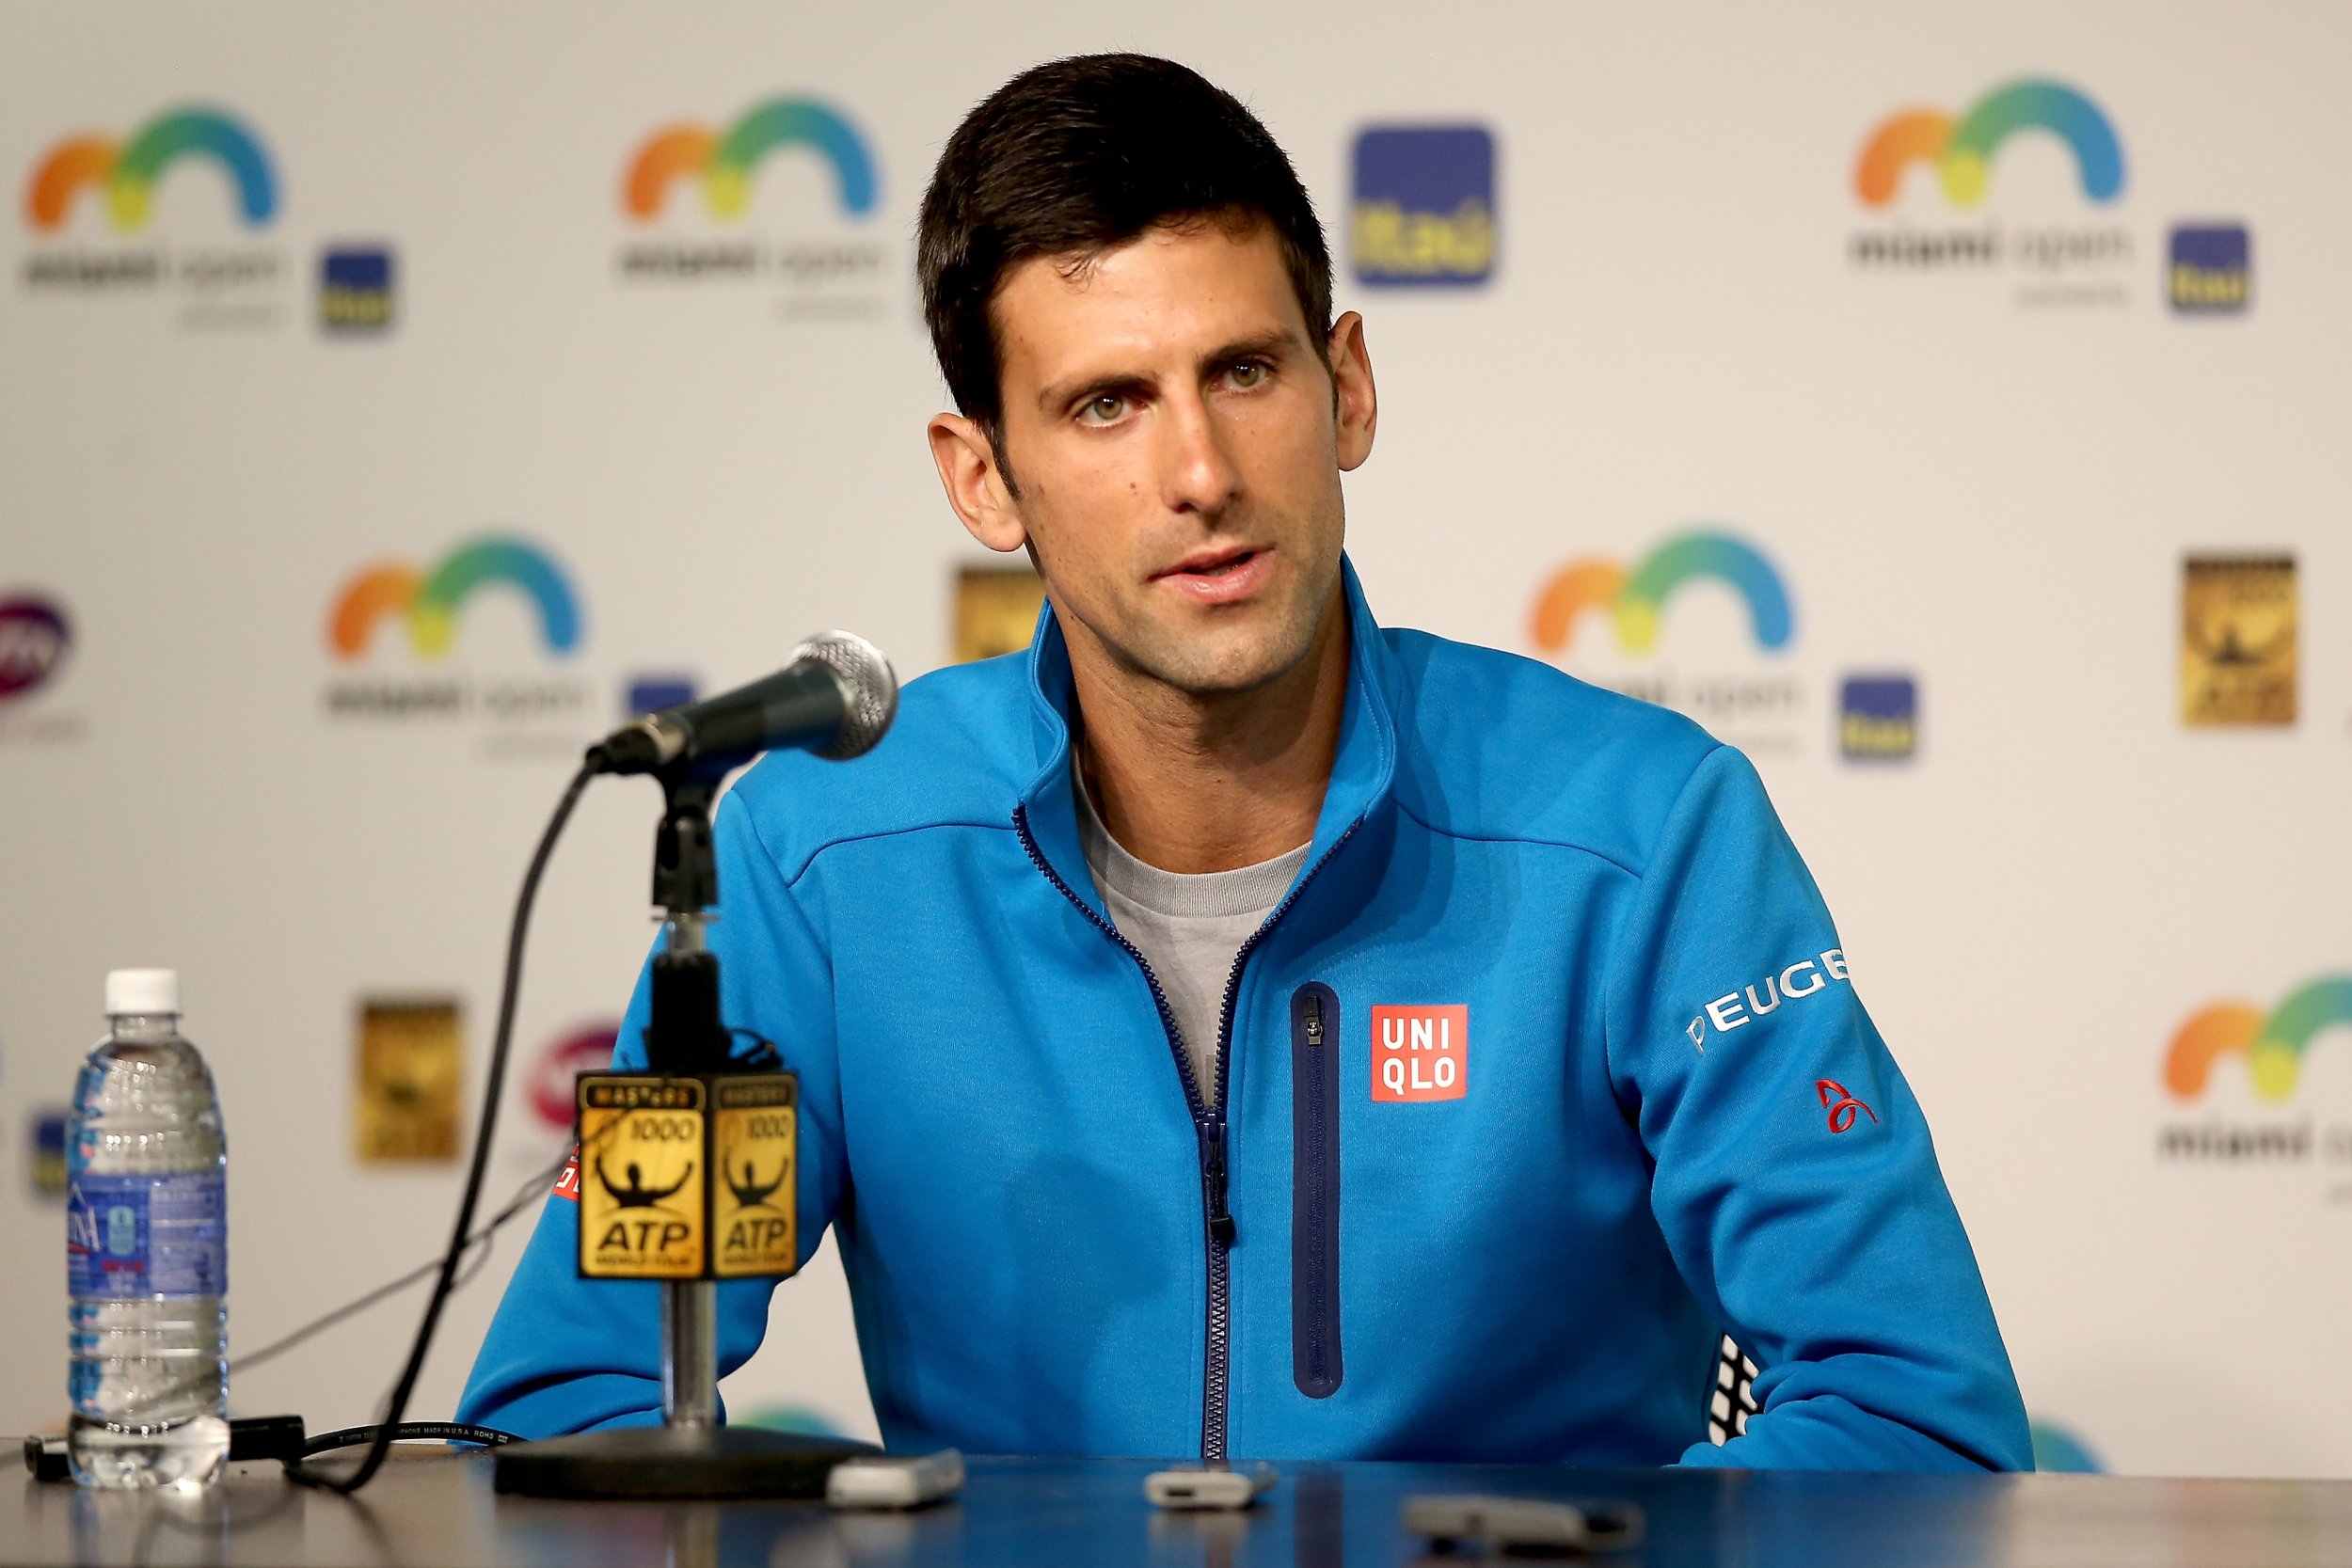 Novak Djokovic has offered a second apology for his comments over equal pay in tennis.